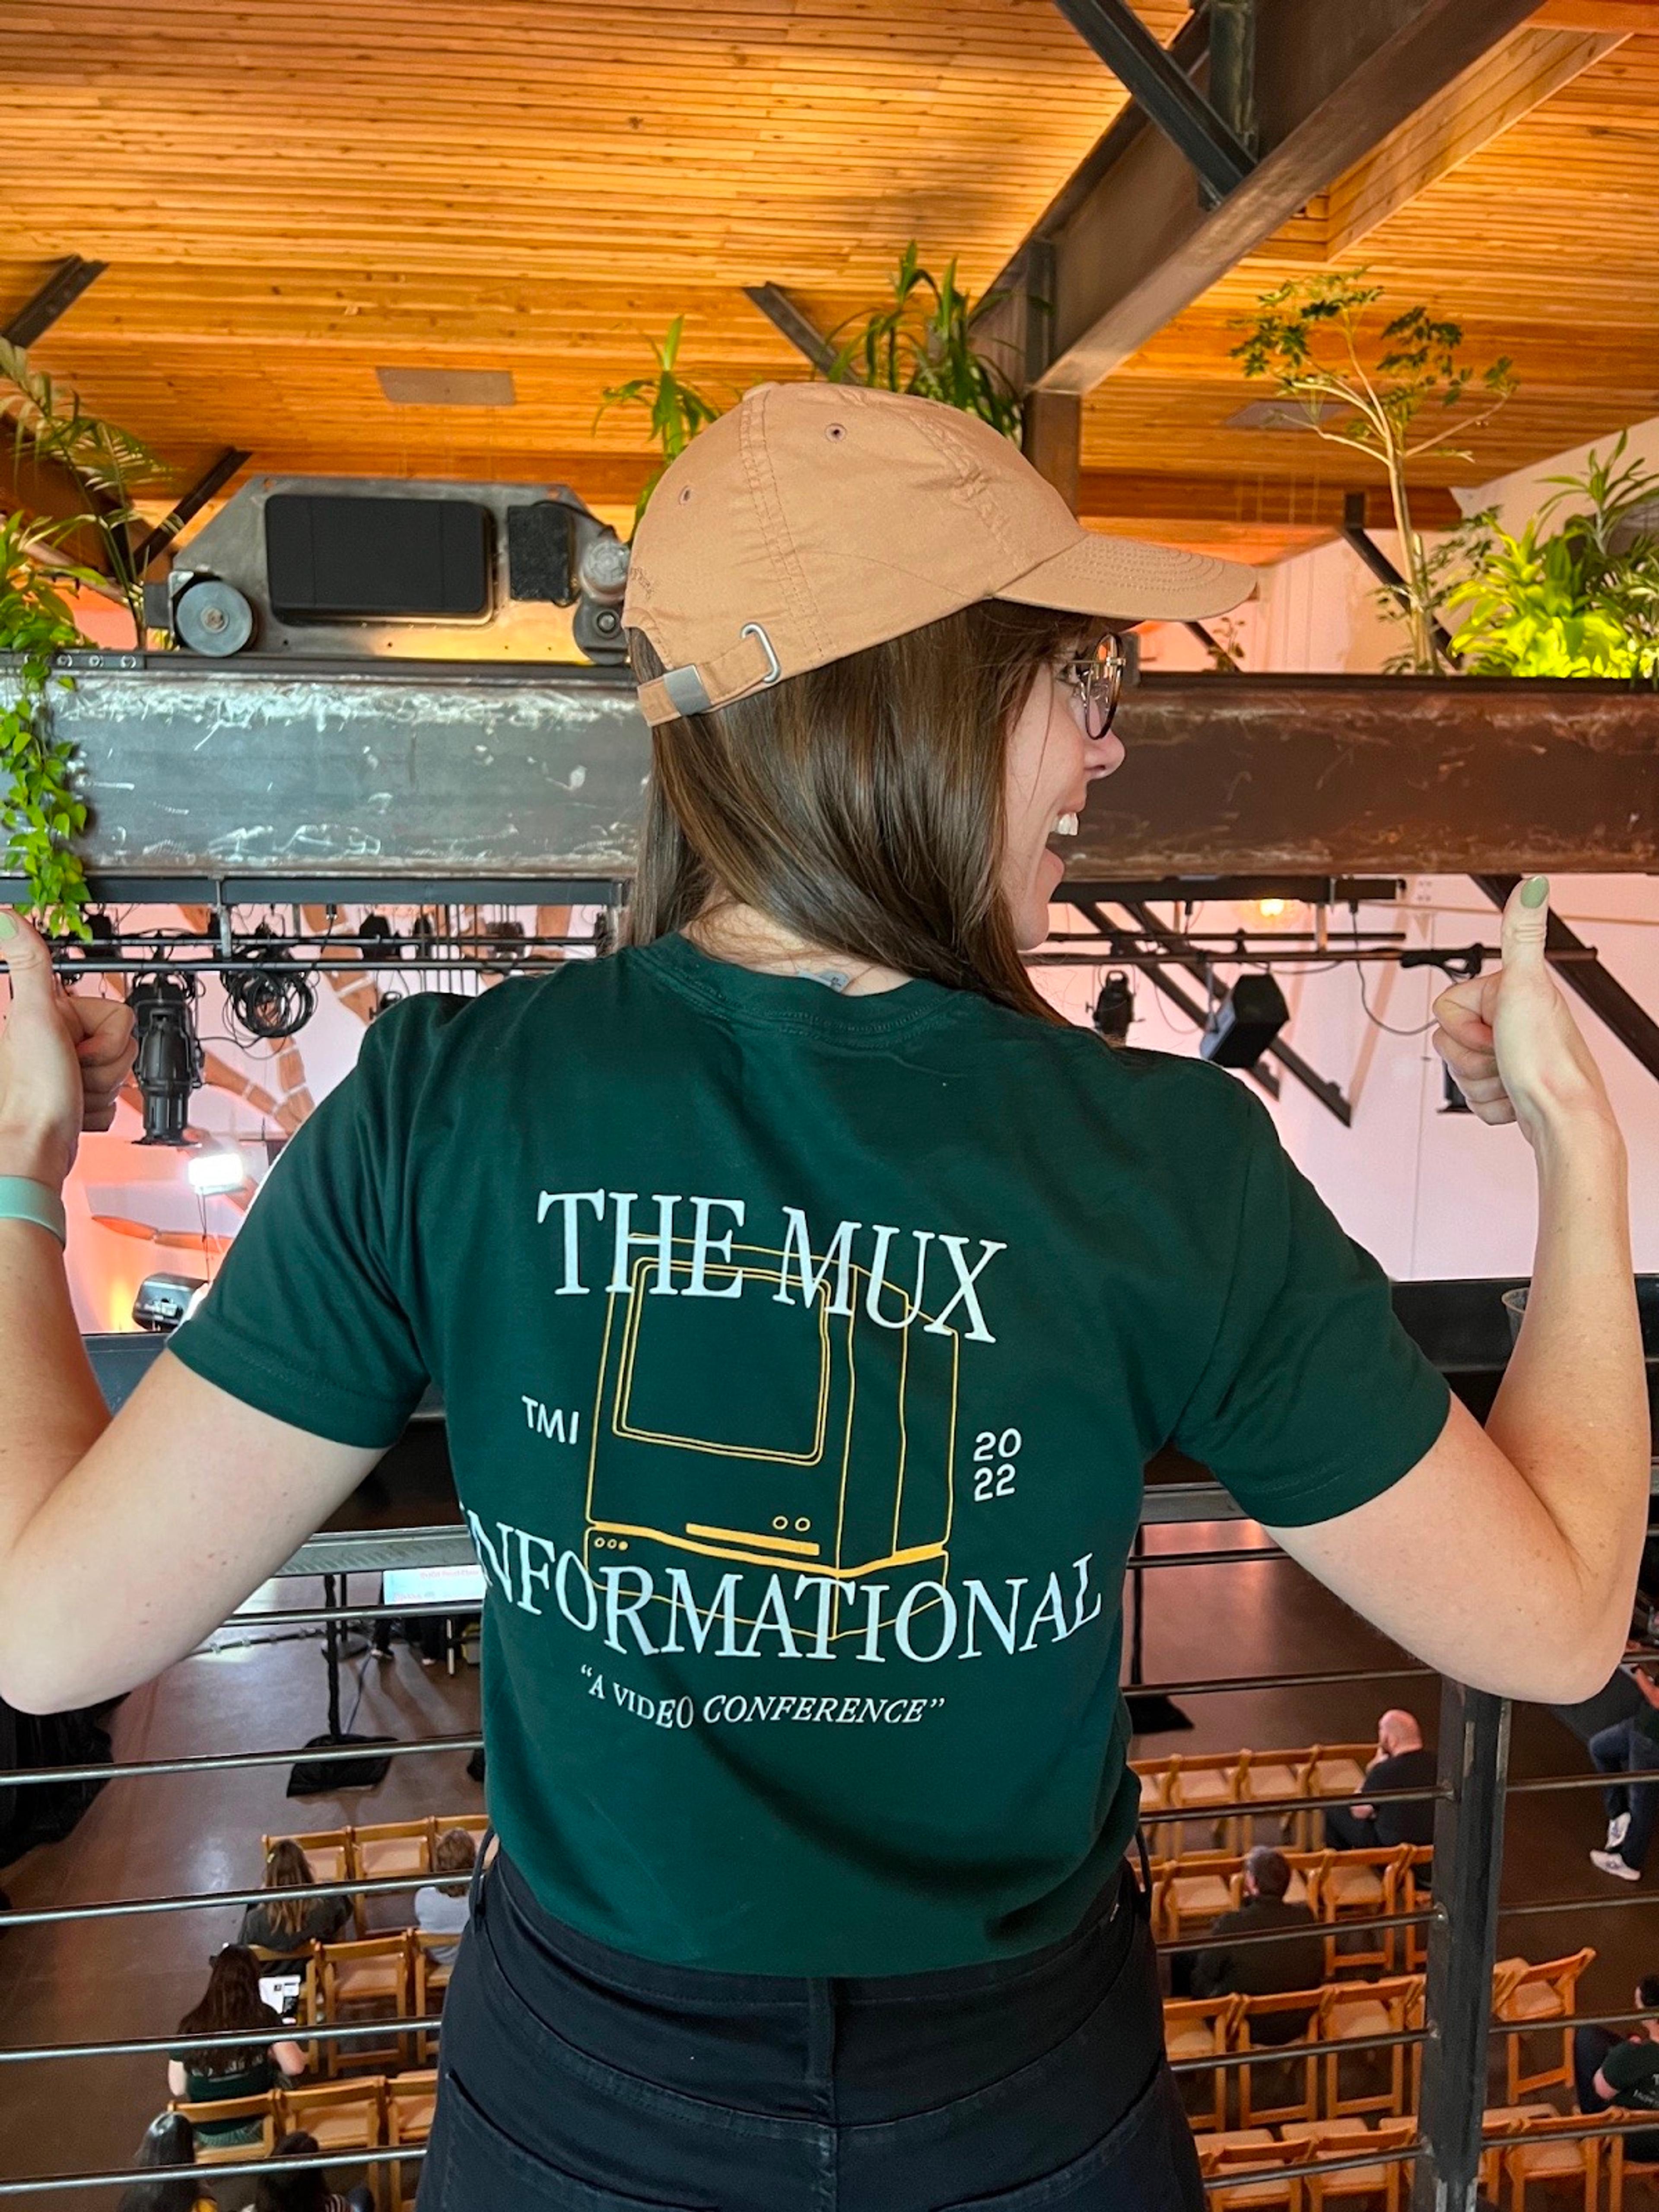 A woman wearing a dark green t-shirt with the words, "The Mux Informational. TMI 2022. A video conference." on it. She is facing away from the camera, with two thumbs up, looking behind her excitedly. She also wears a brown hat and black jeans.